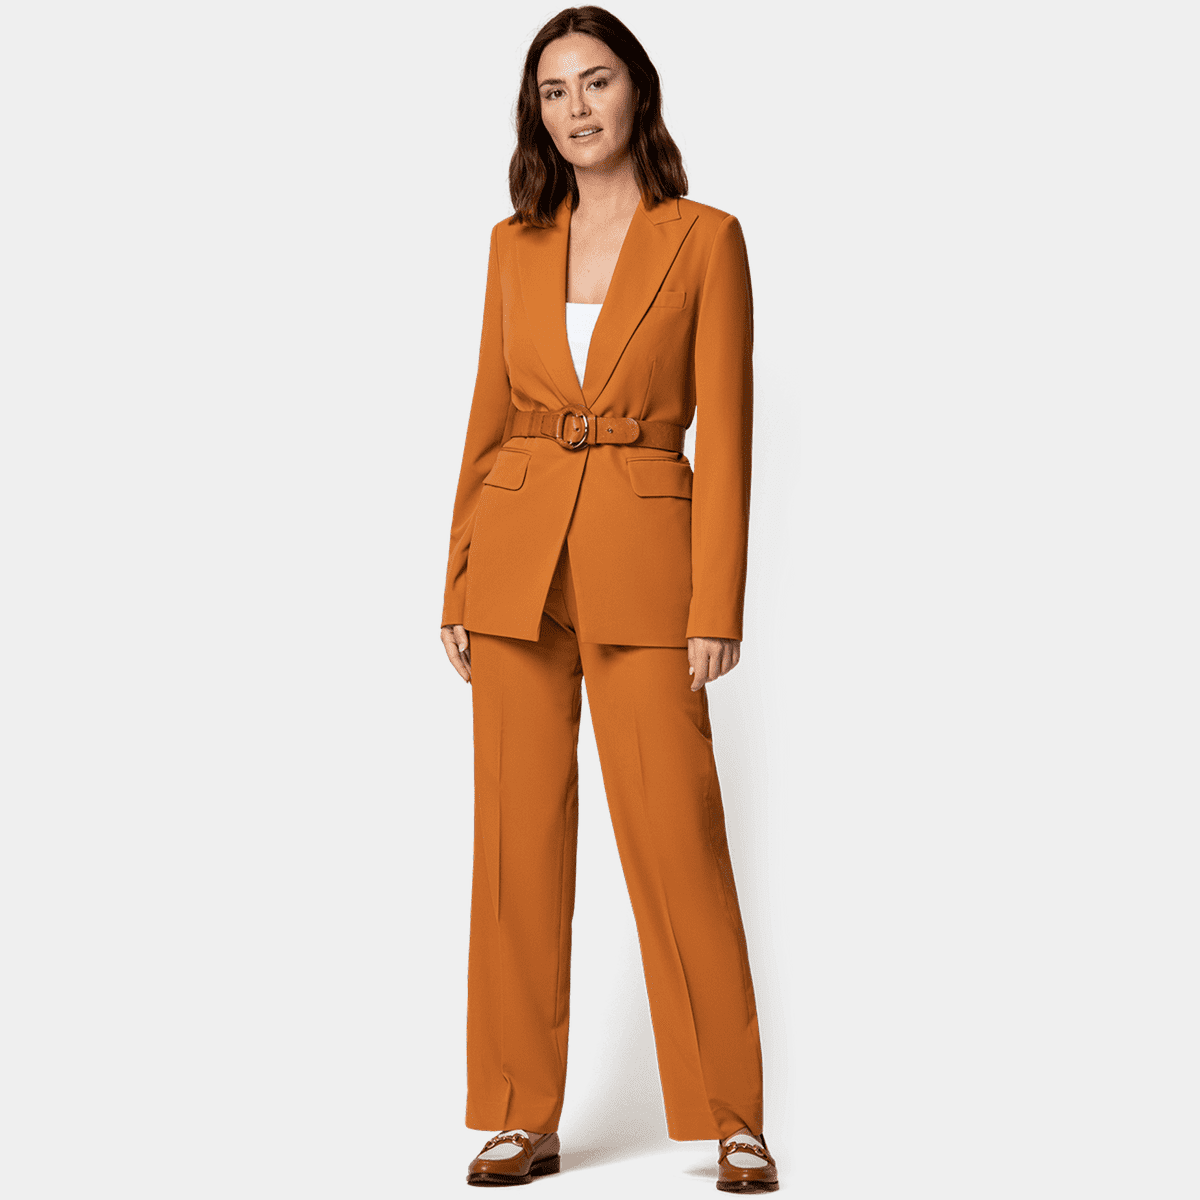 Orange Wide Leg Pant Suit - relaxed fit | Sumissura